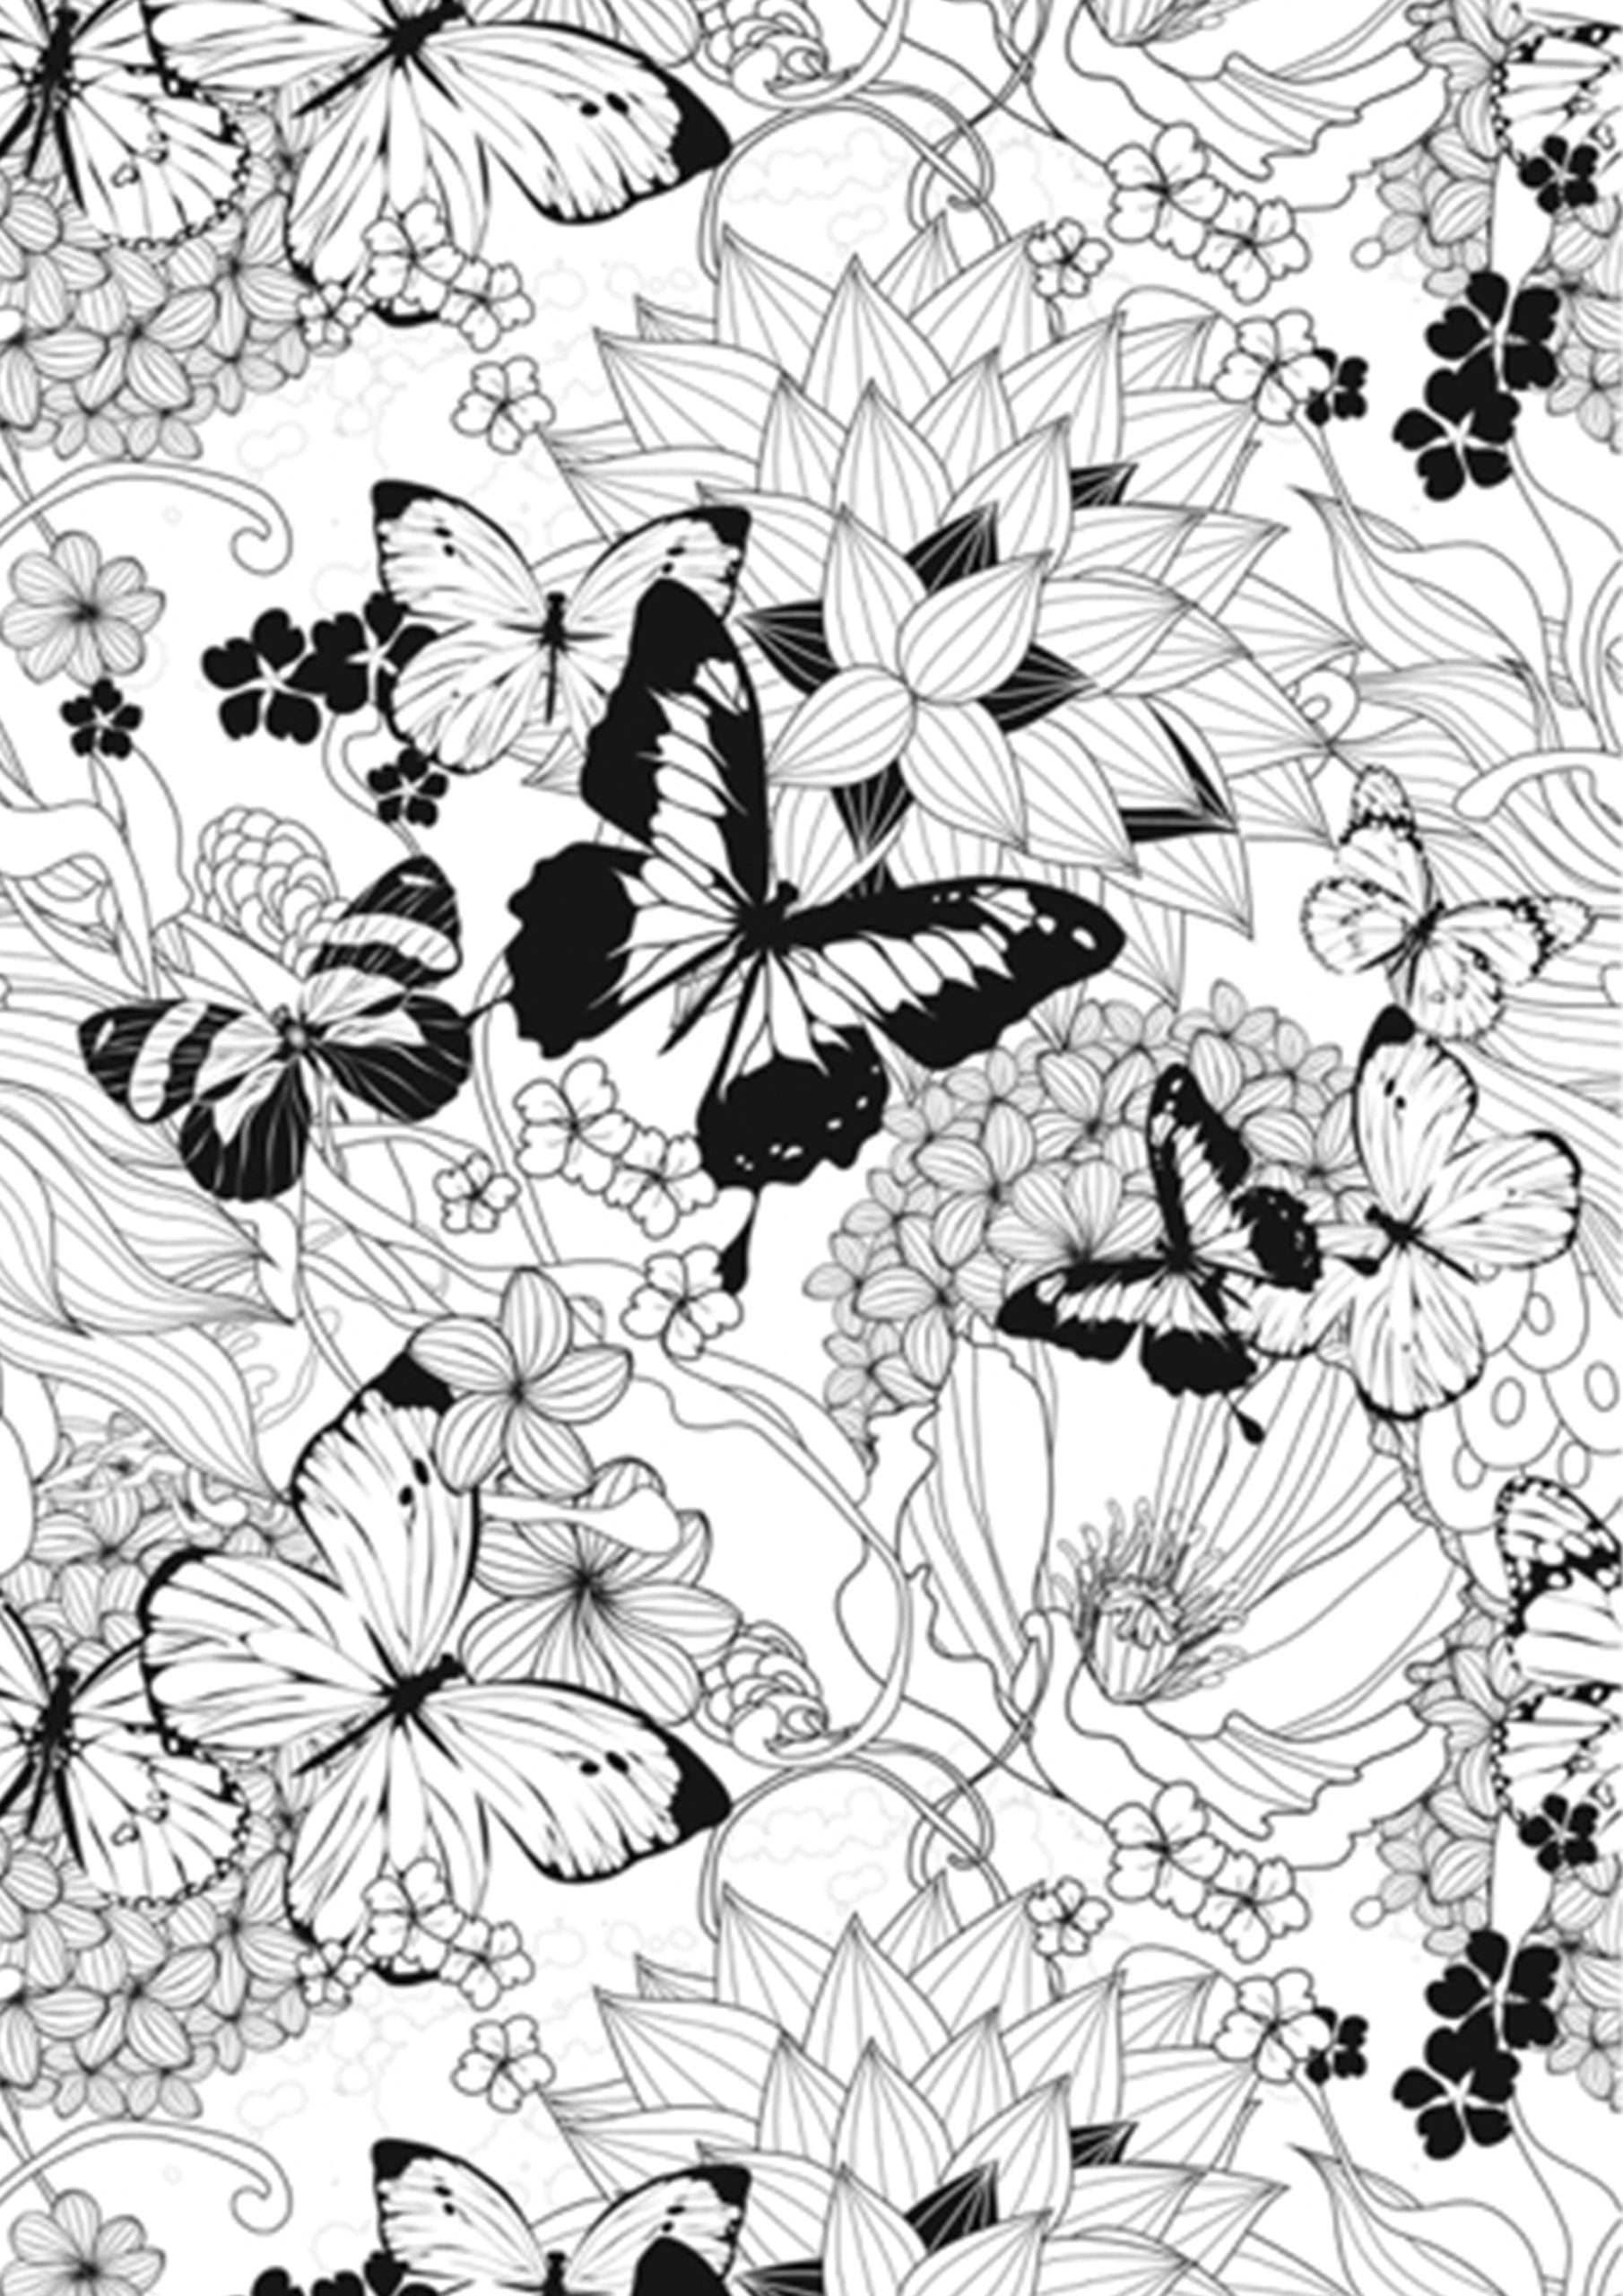 Butterfly Coloring Book For Adults: An Adult Coloring Book of 40 Detailed  and Patterned Butterflies by a Variety of Artists (Animal Coloring Books  for